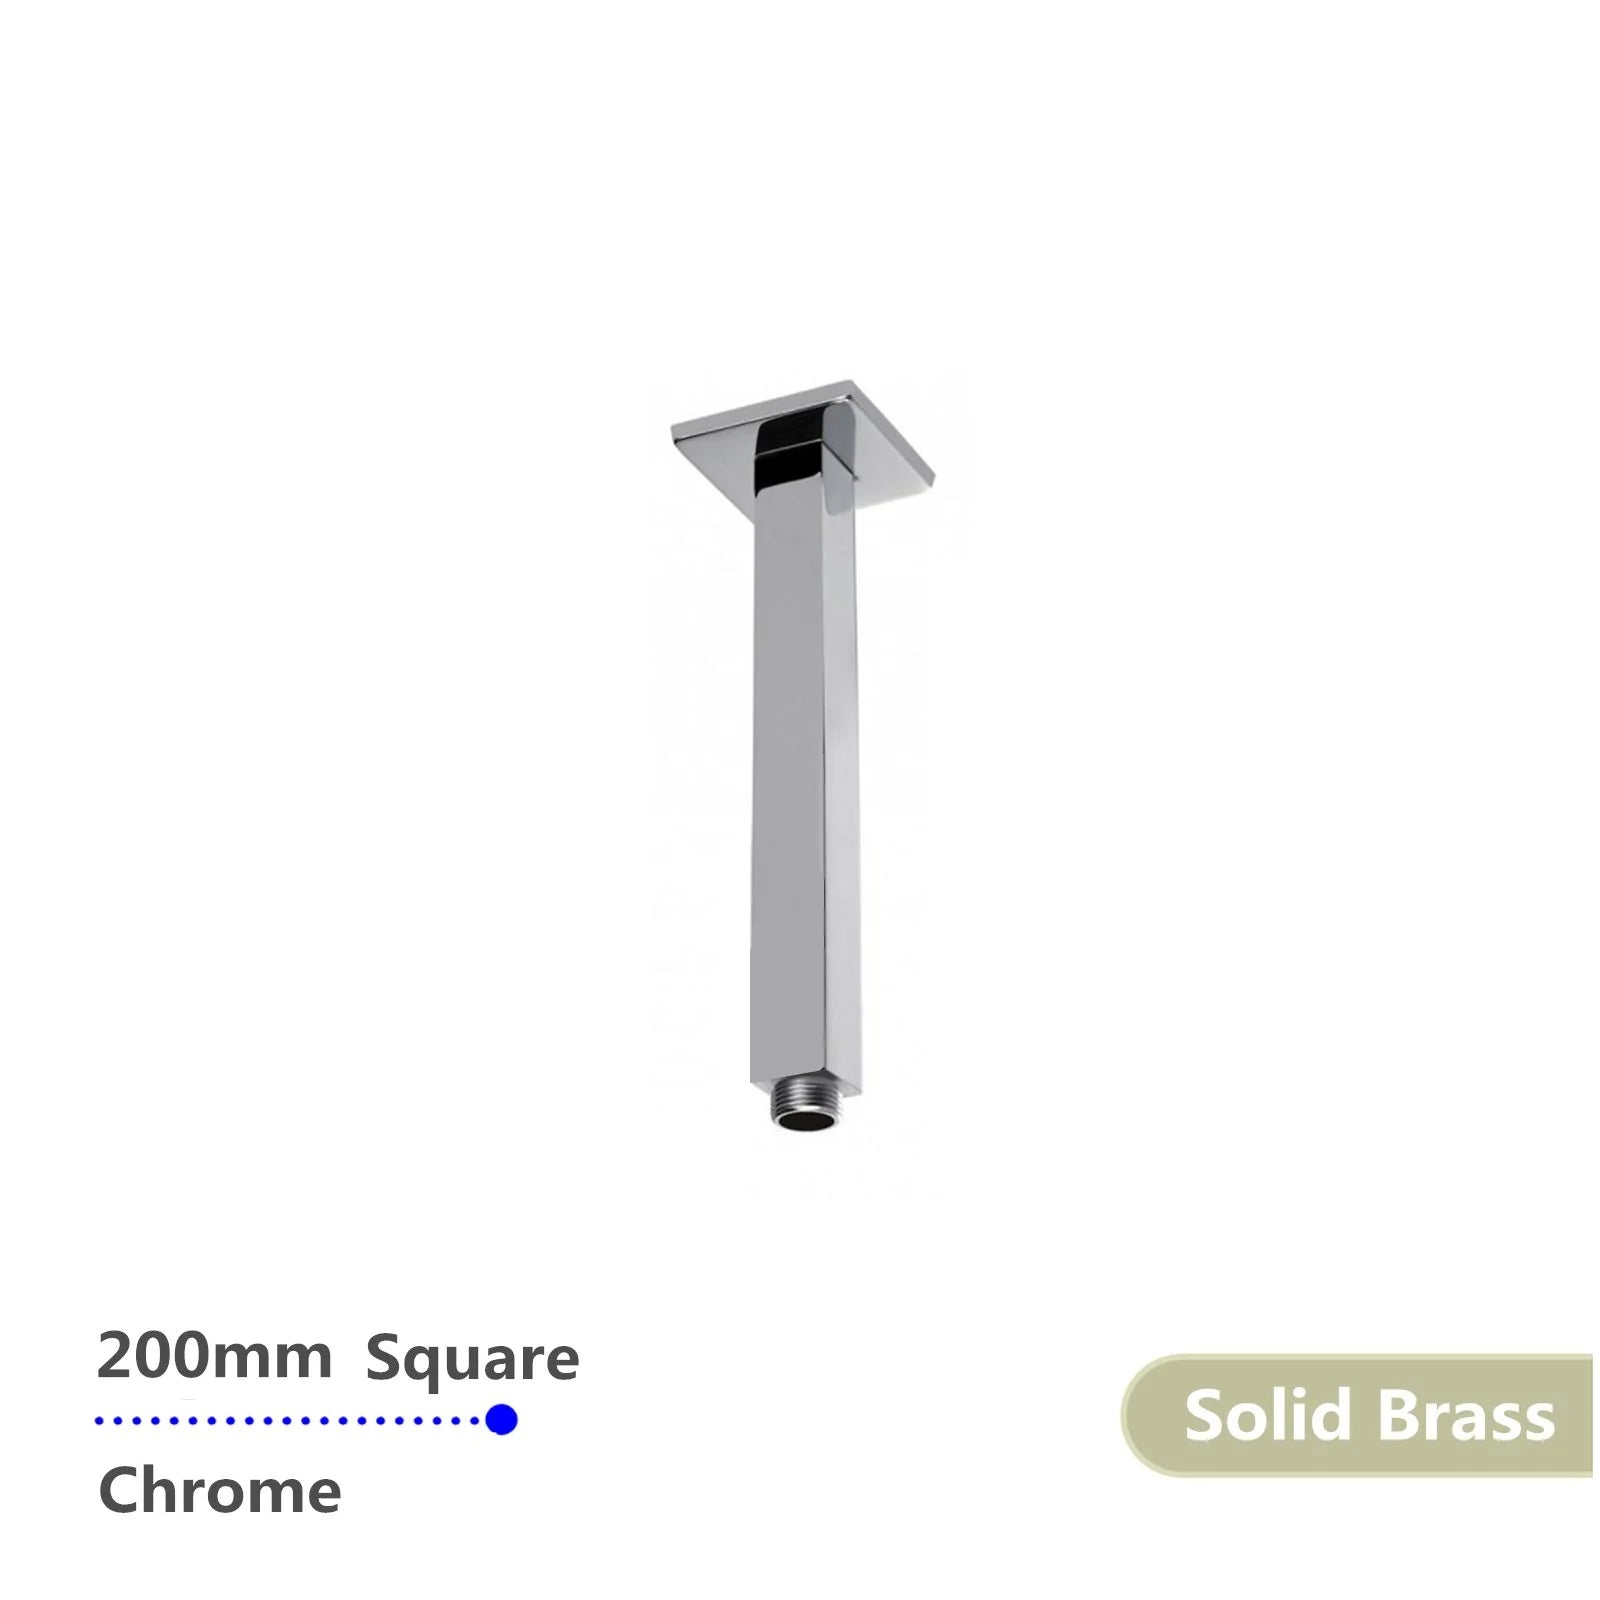 Square Ceiling Shower Arm: Modern Sleek and Functional-CH0103.SA-200MM-Chrome